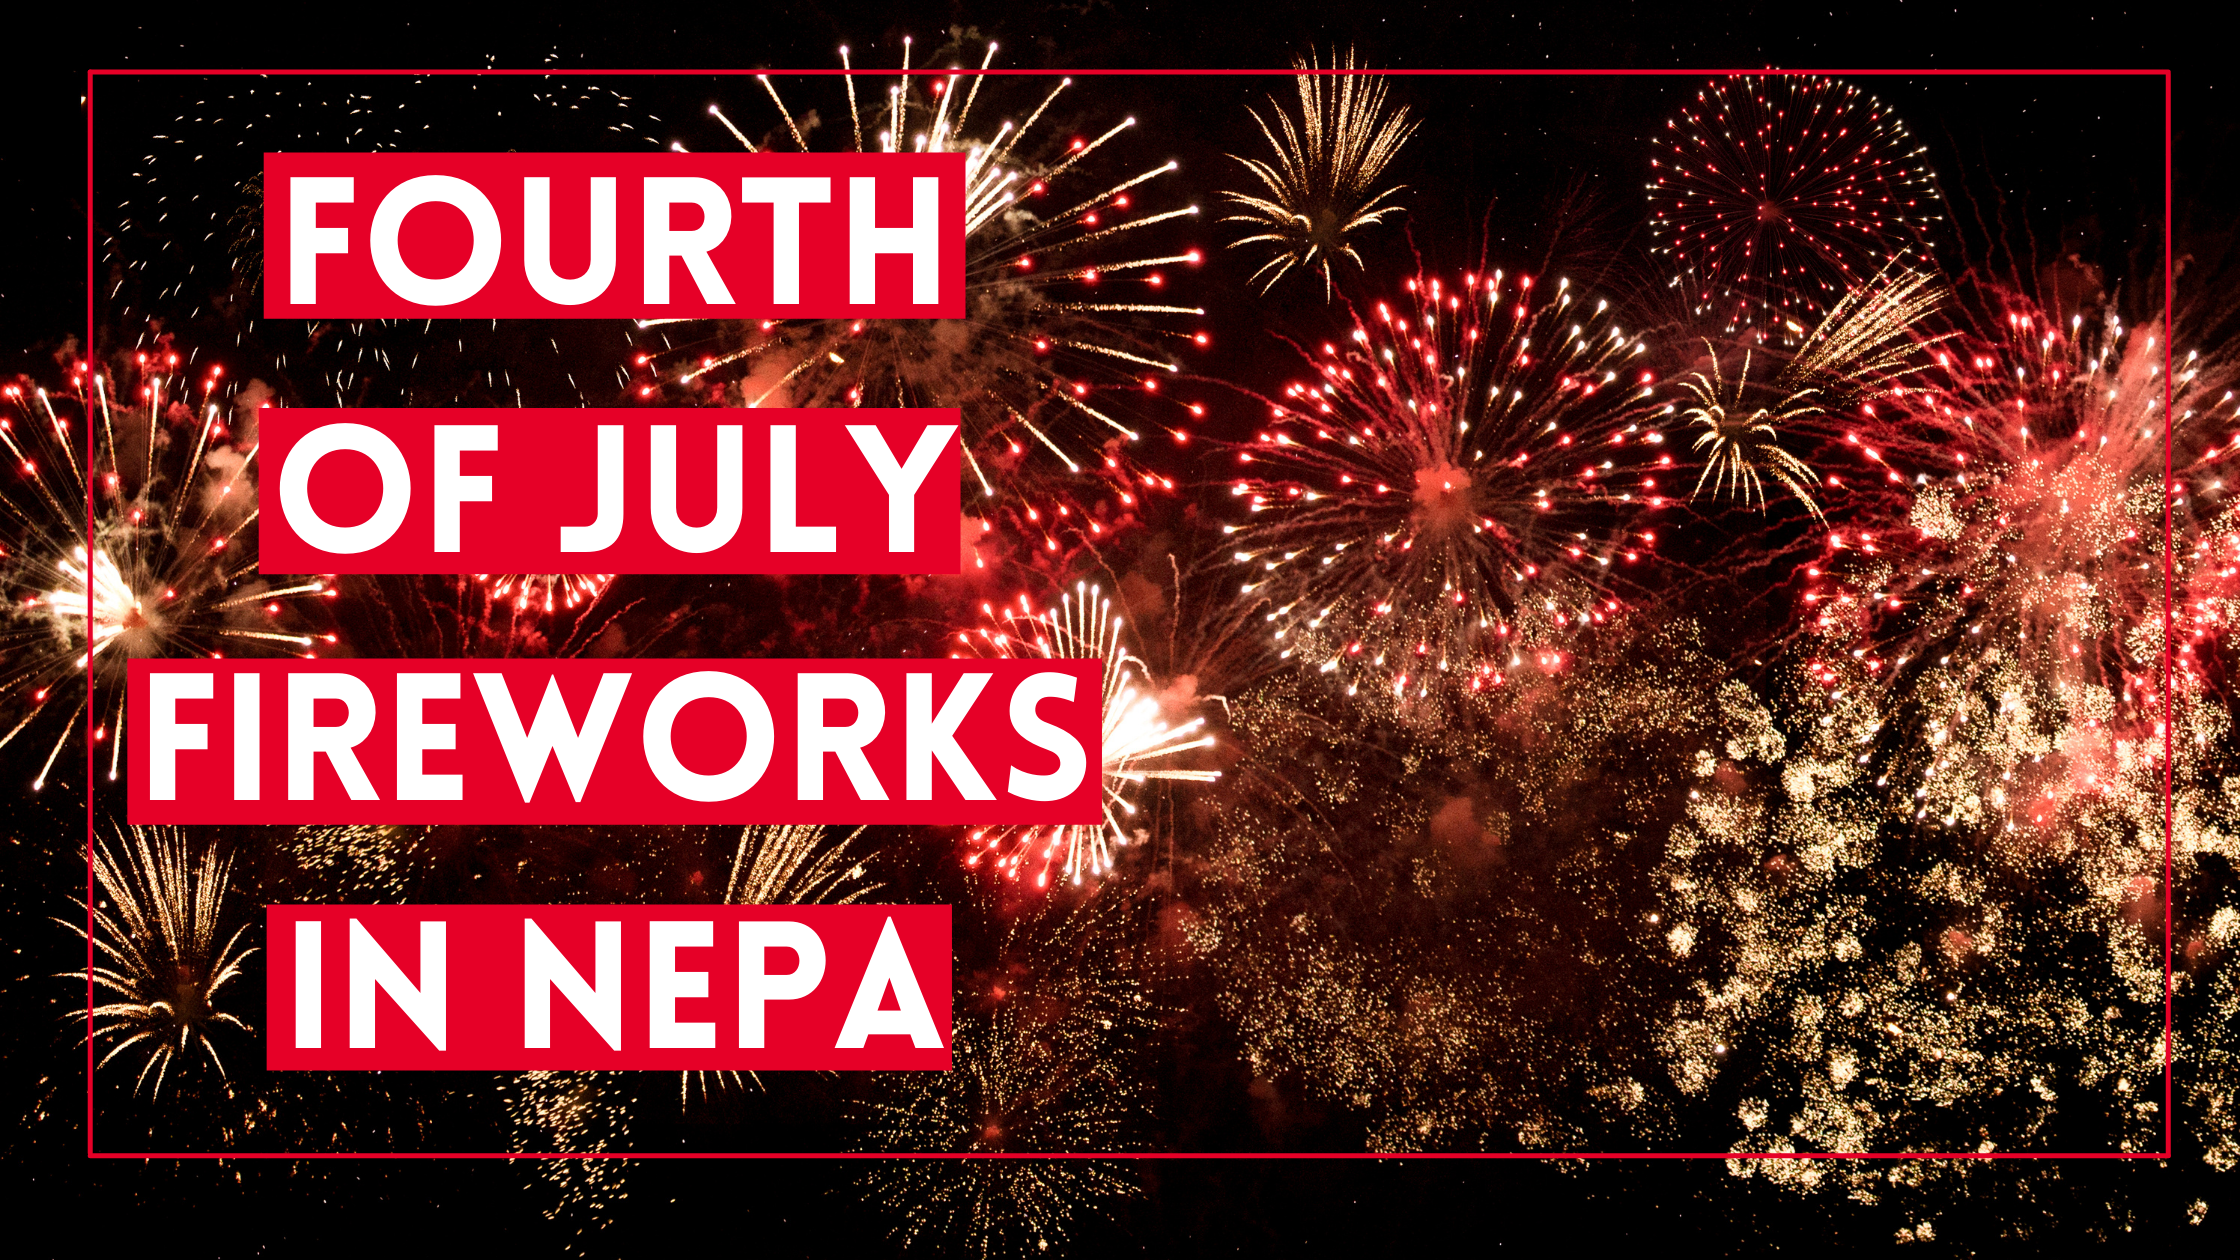 Where to Watch Fireworks in NEPA this July 4th